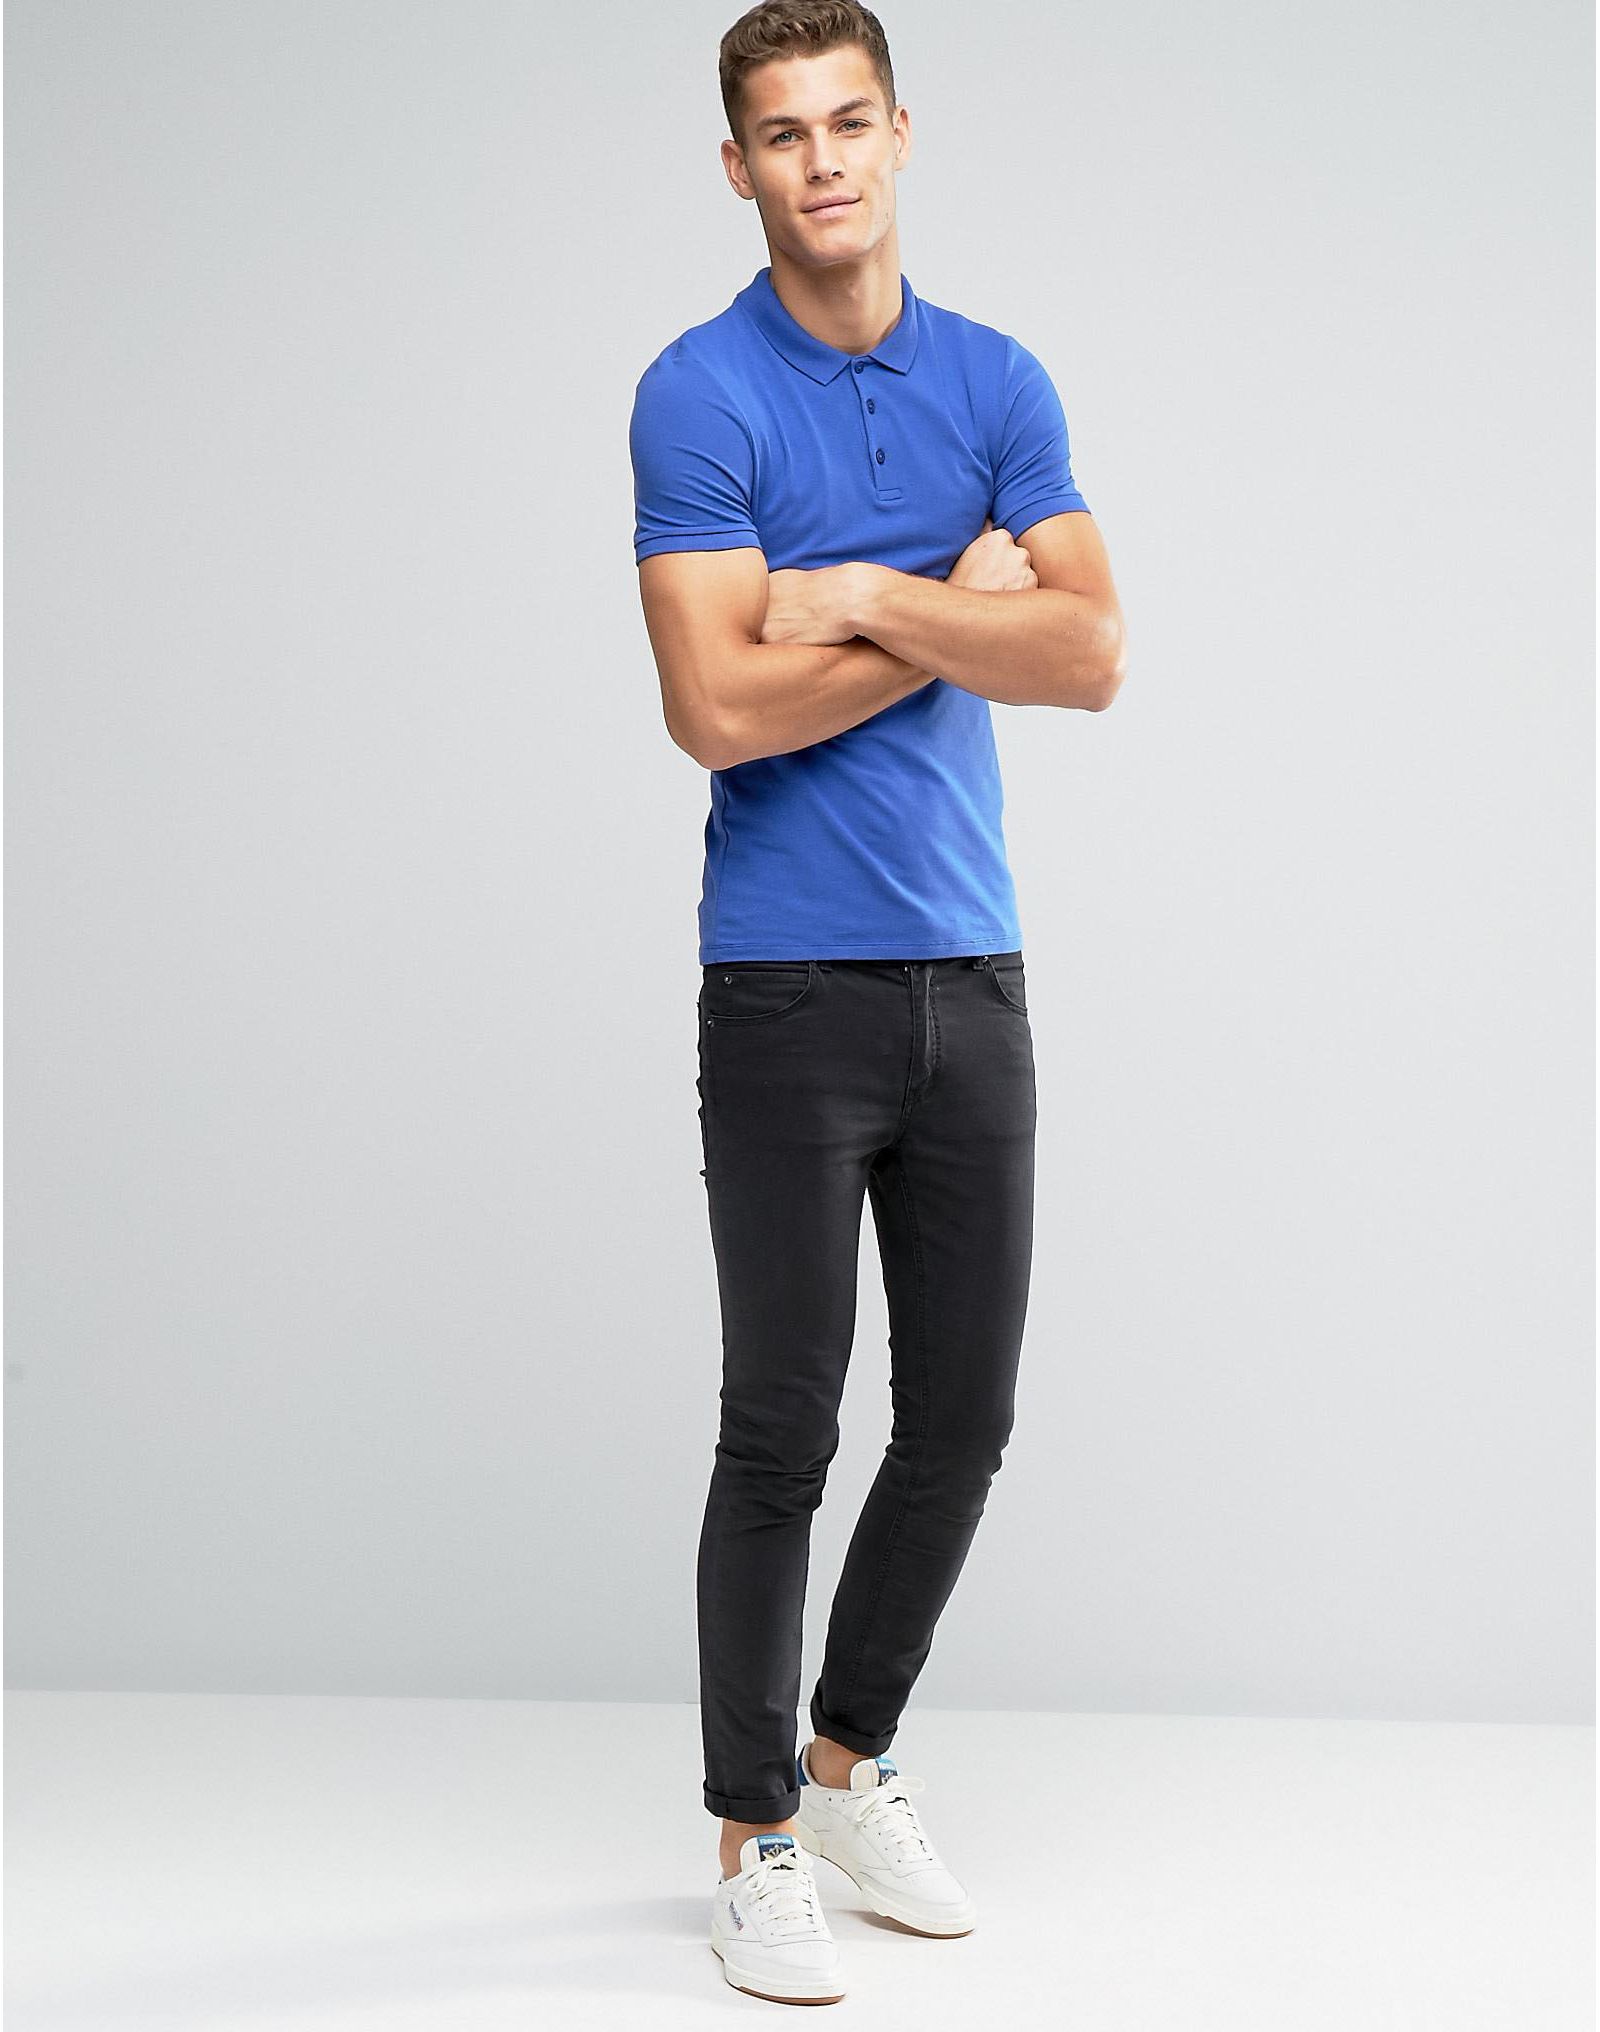 ASOS Extreme Muscle Polo Shirt In Blue